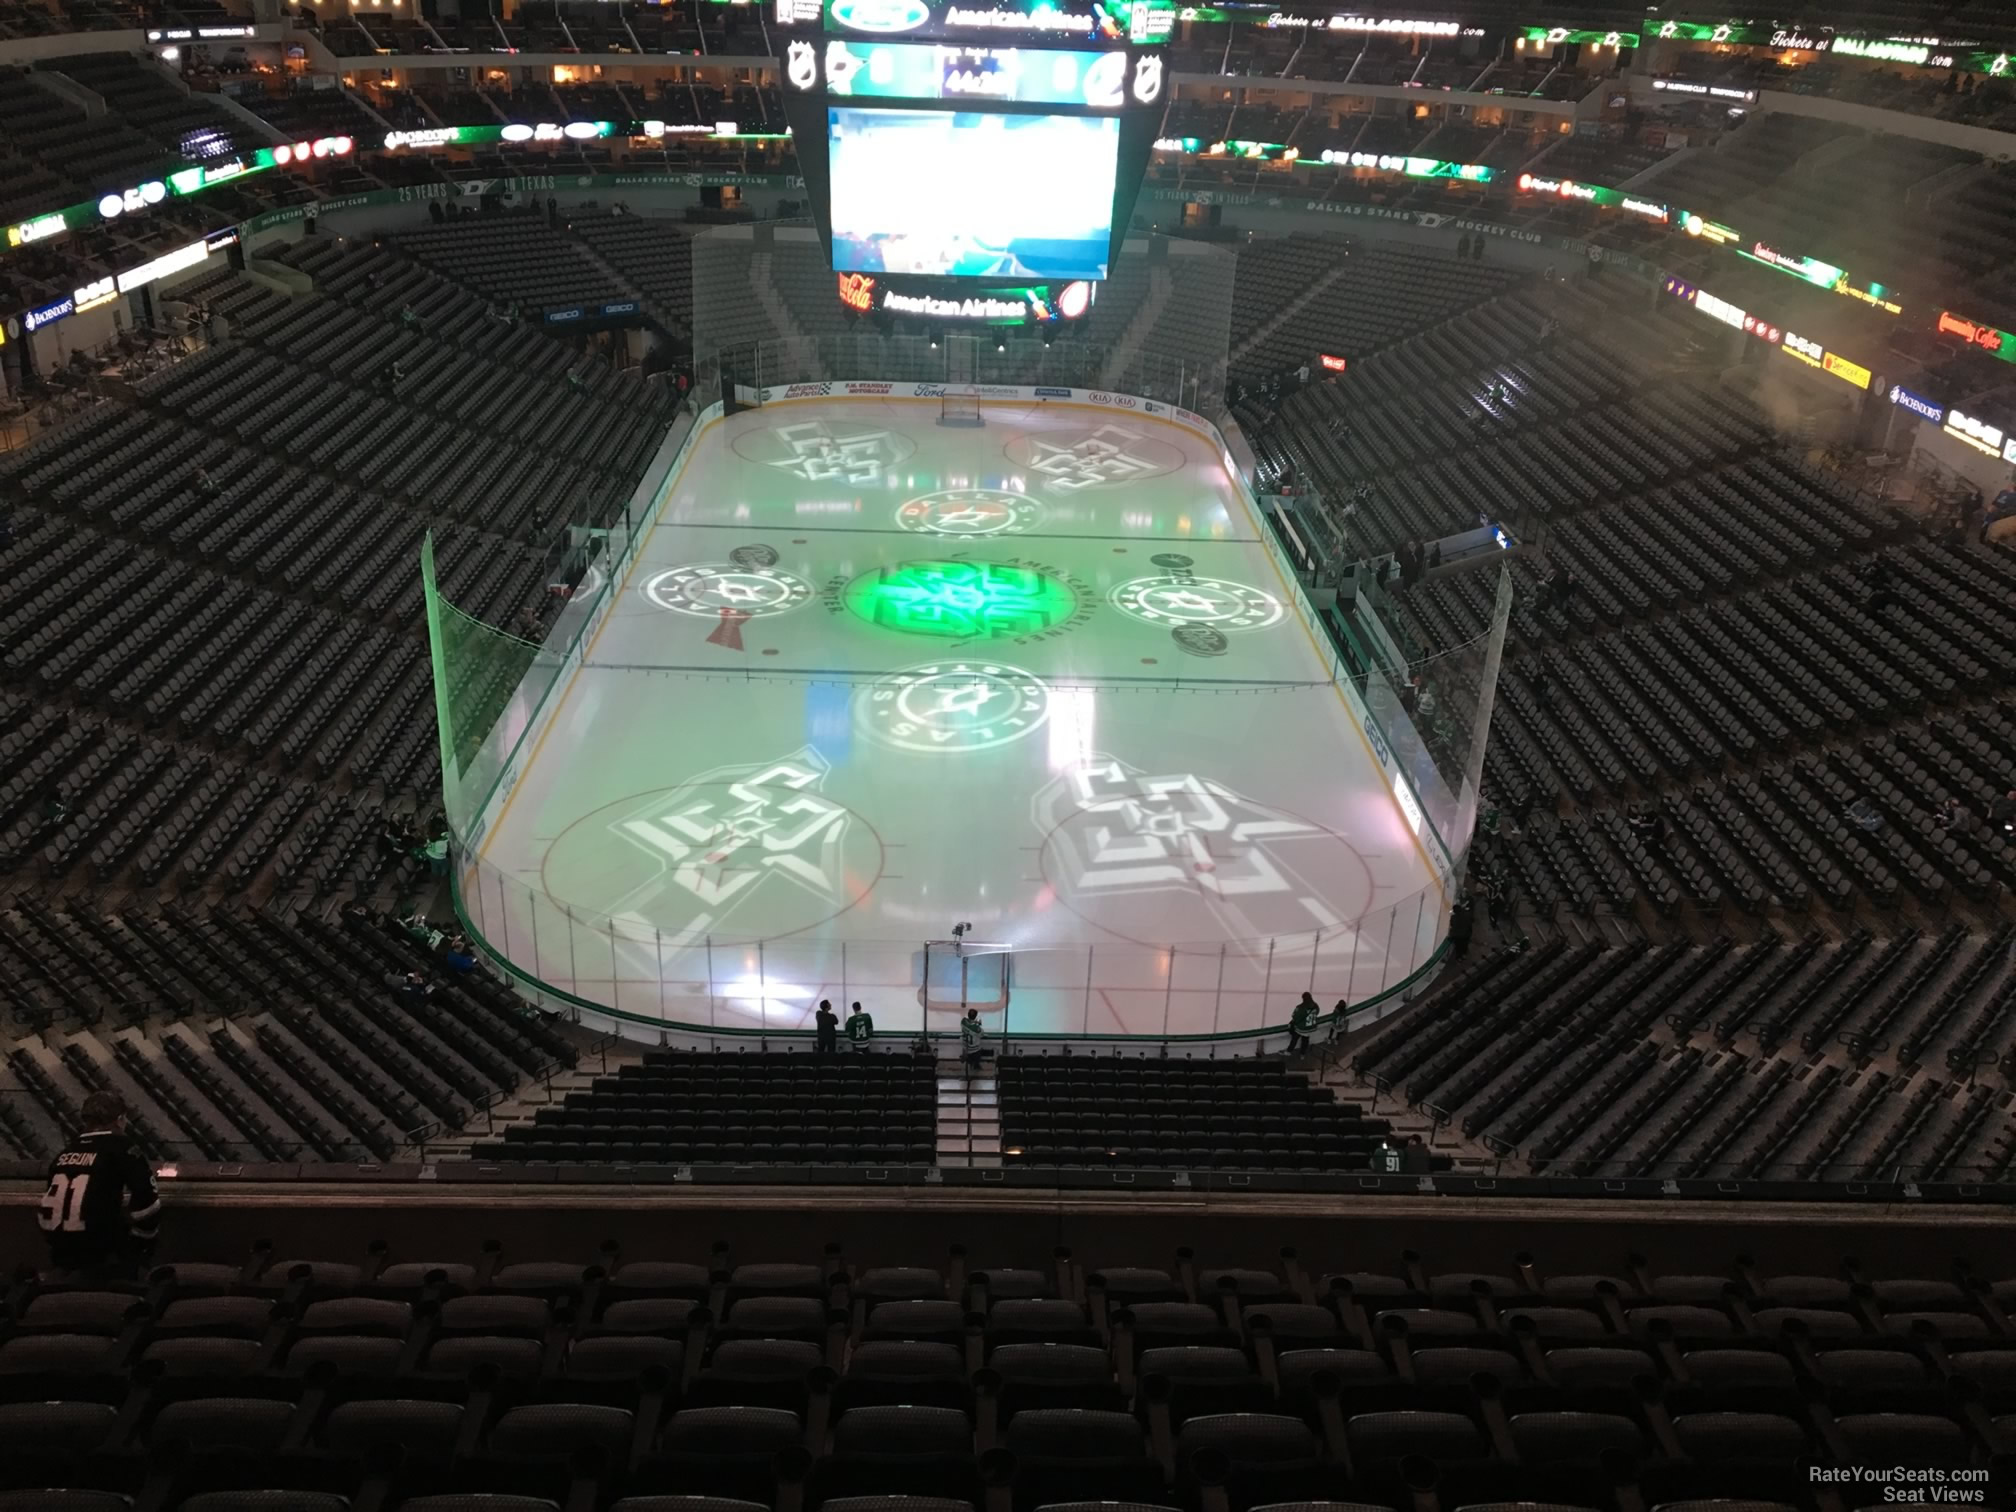 section 301, row ee seat view  for hockey - american airlines center